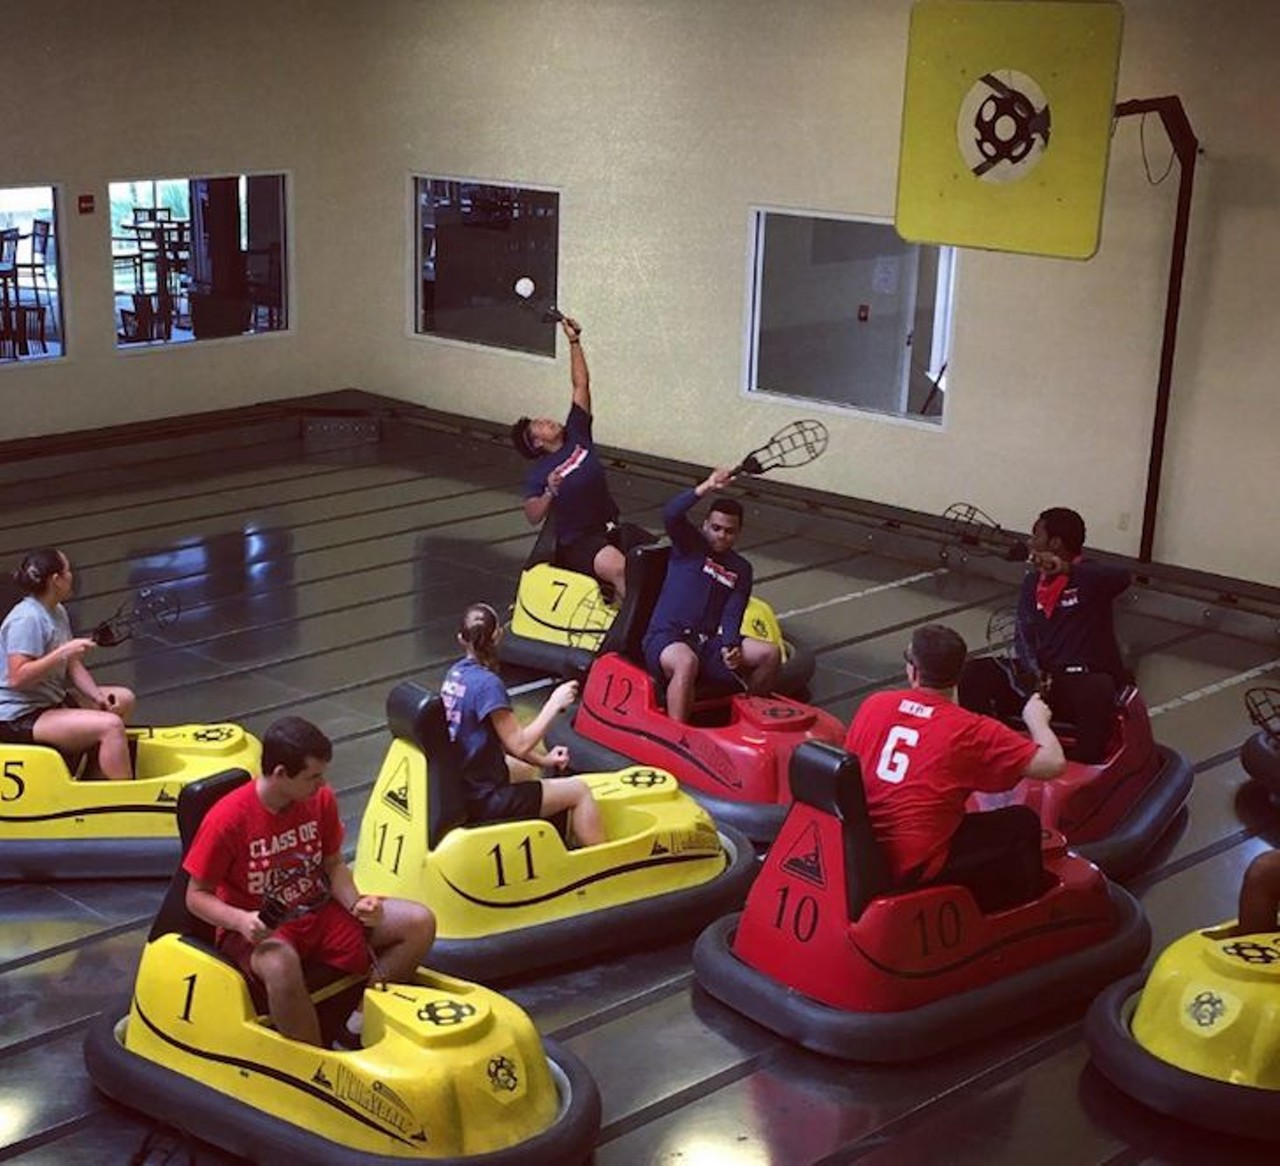  Feed your competitive side in a game of Whirlyball 
6464 International Drive, 407-212-3030, whirlydome.com 
A sports competition that combines go-karting, basketball and hockey, Whirlyball is sure to test your coordination and keep you occupied as you shoot for that victory.  
Photo via whirlydome/Facebook